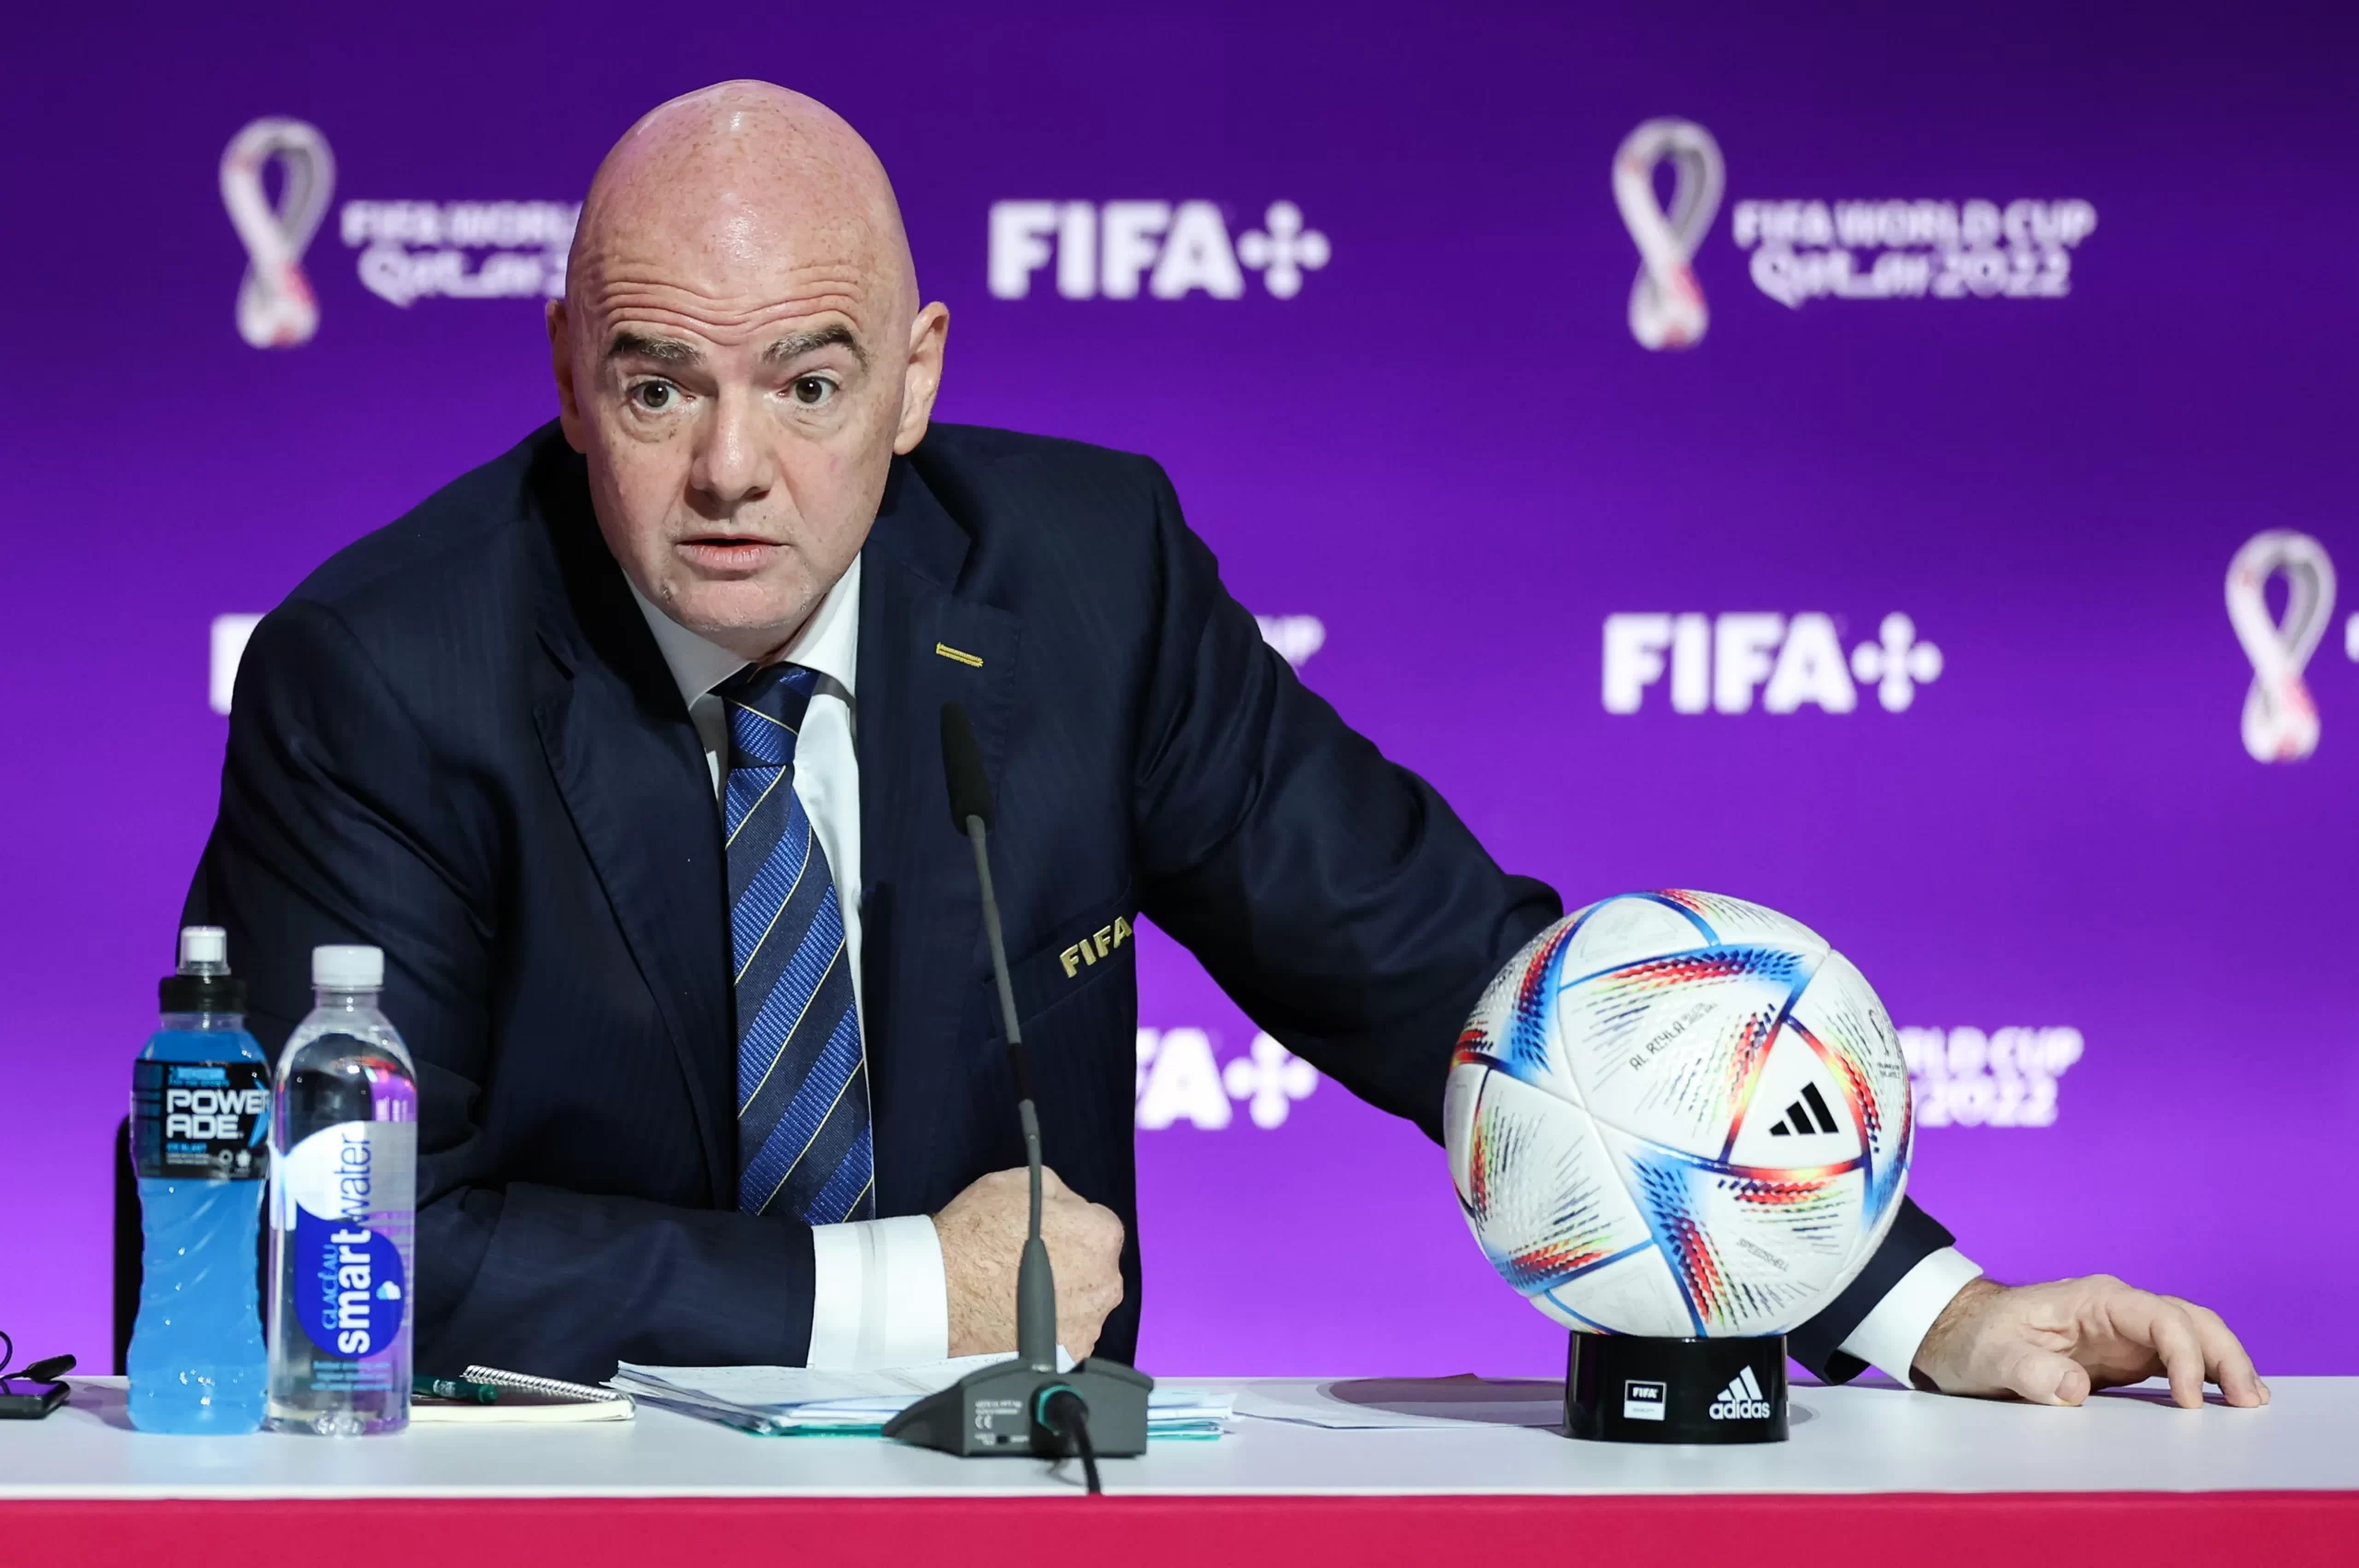 FIFA President: FIFA World Cup Qatar 2022 Was the Best World Cup Ever